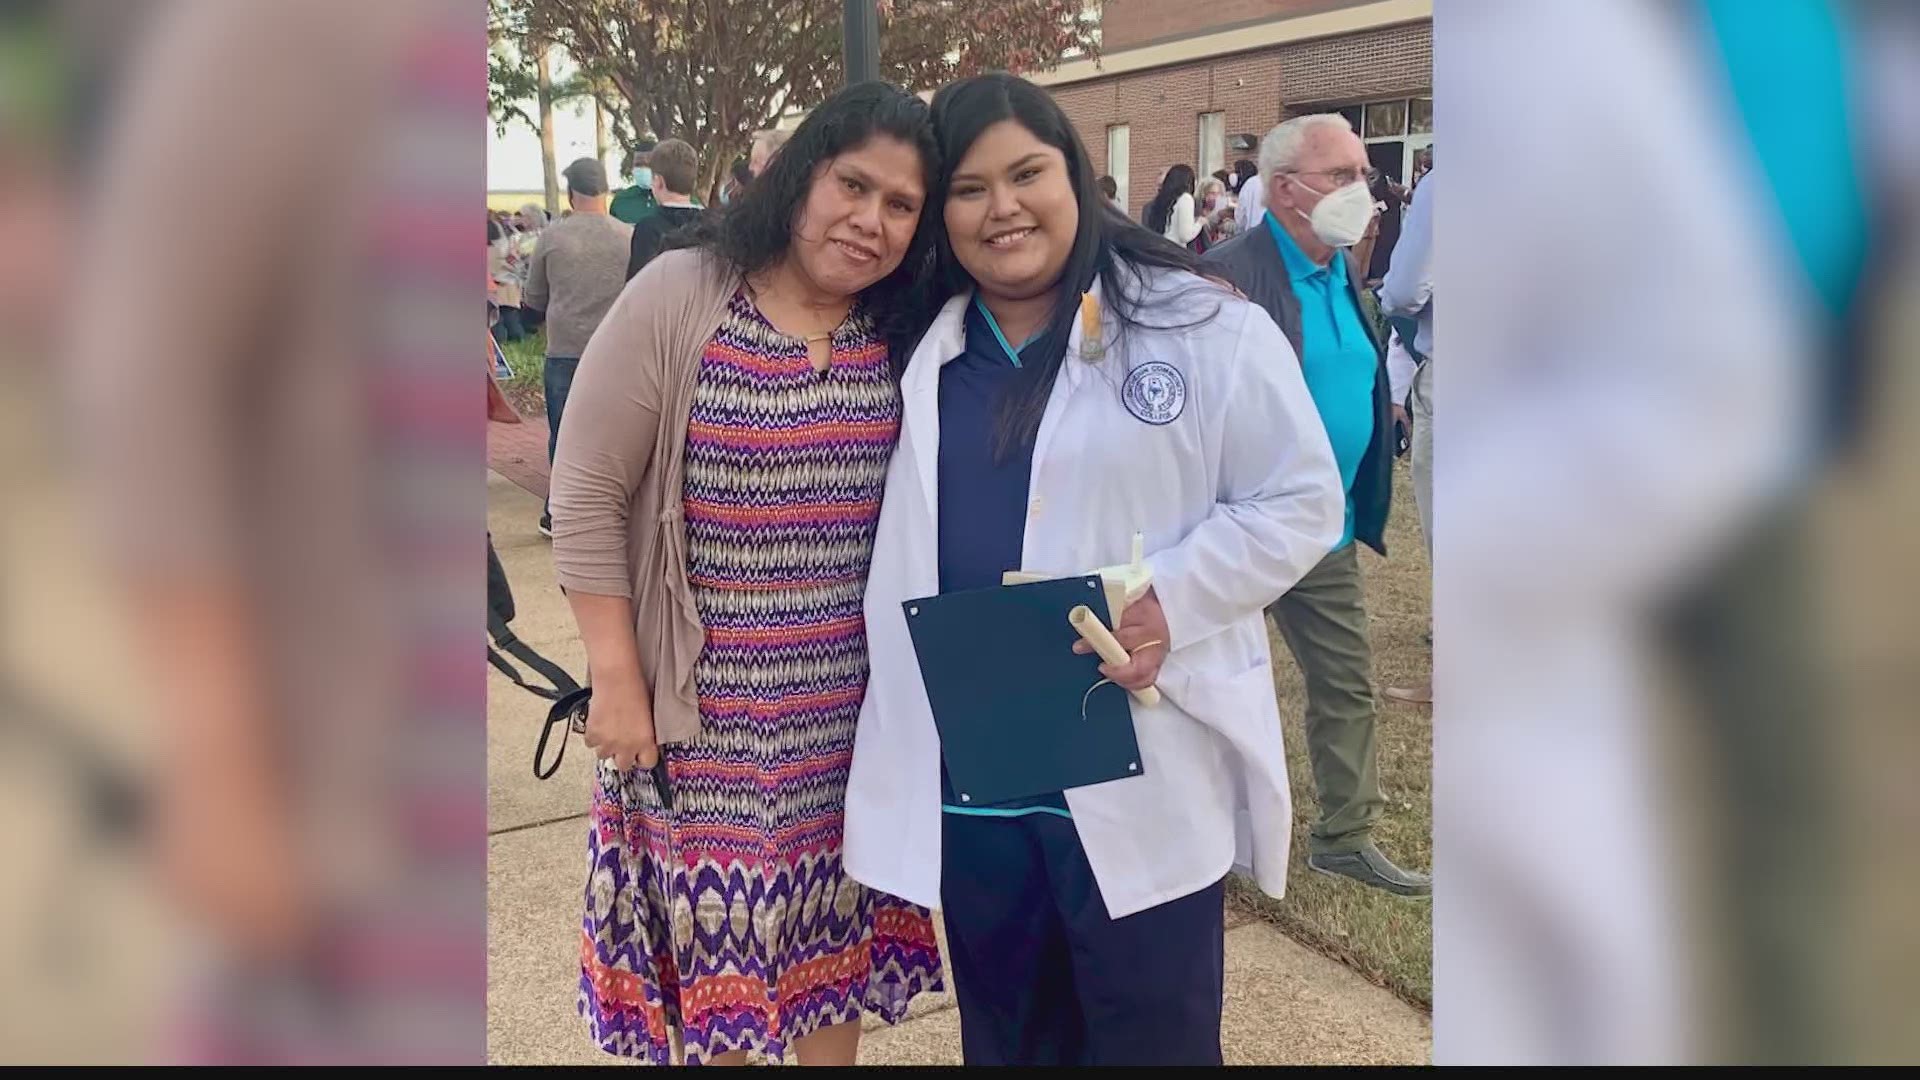 Elizabeth Ovalle said she spent about two weeks on a ventilator while her mother was a couple rooms down the hall fighting the coronavirus as well.